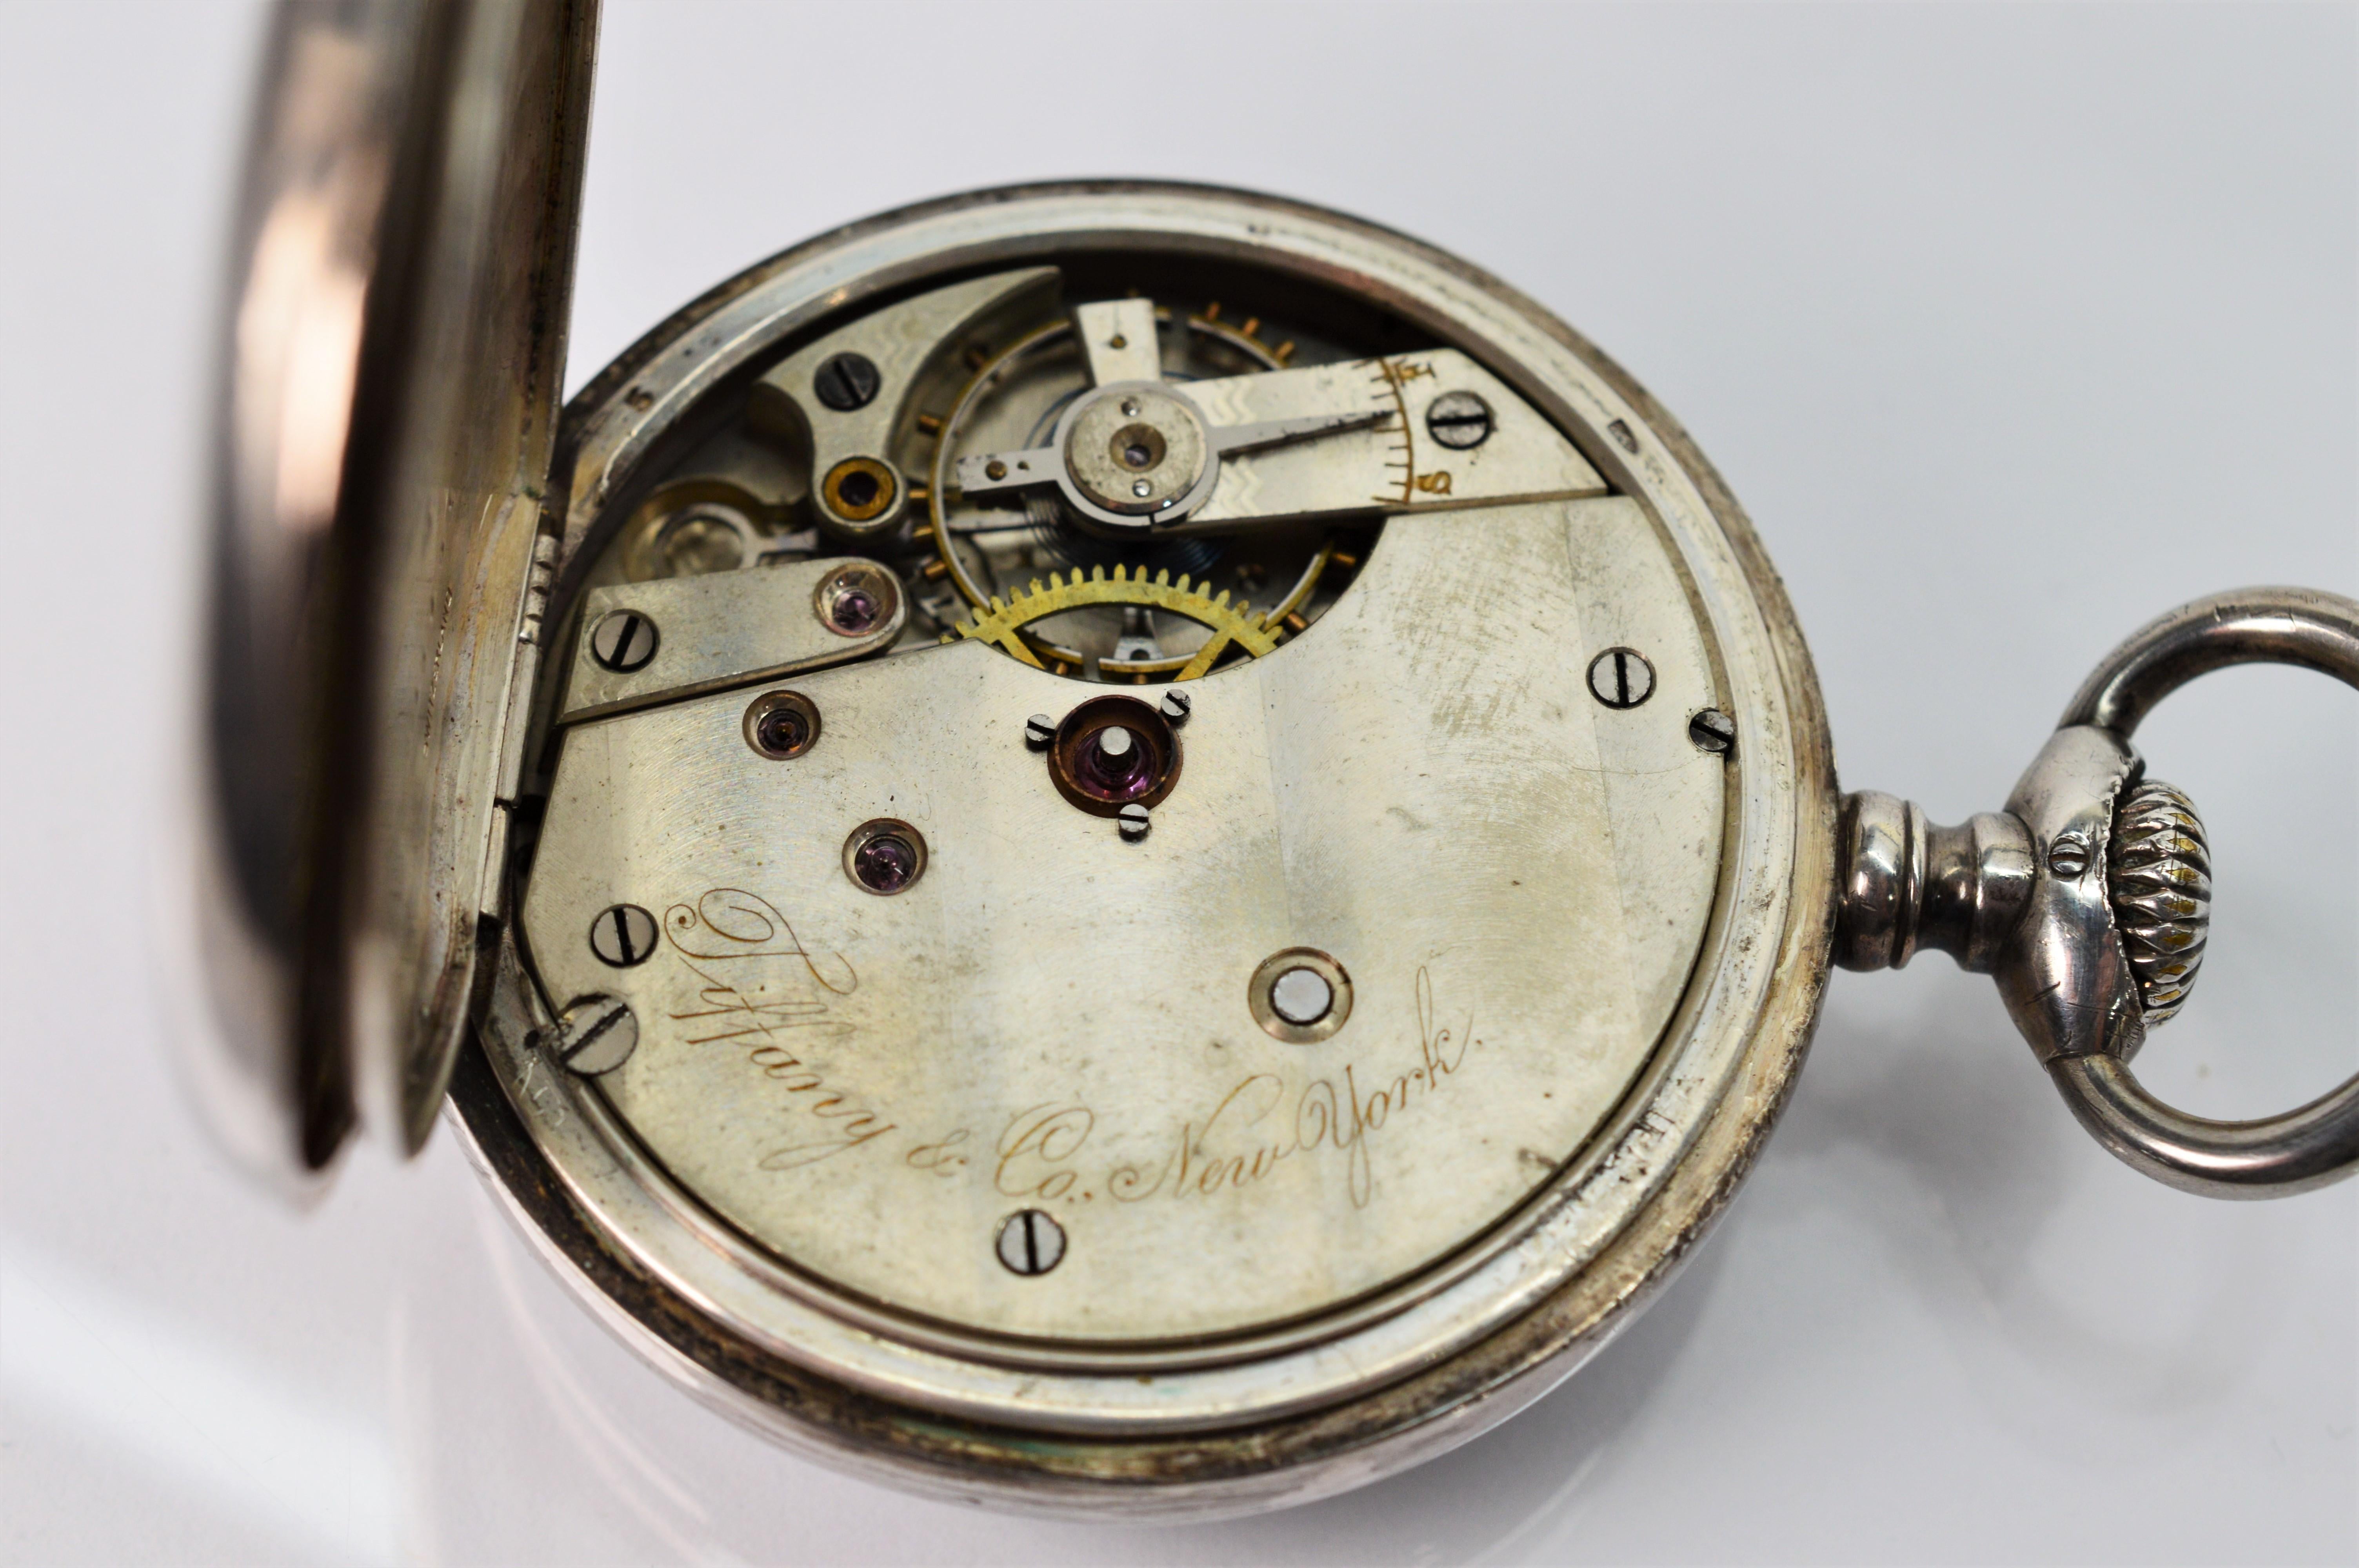 Authentic Tiffany & Co. New York .935 Sterling Silver Men's Pocket Watch, circa 1900 to 1920. Size 47 mm. Hunter Case number 493051.
This collector piece has a porcelain face with Arabic numerals and has outer 5 minute incremental scale. Slight wear